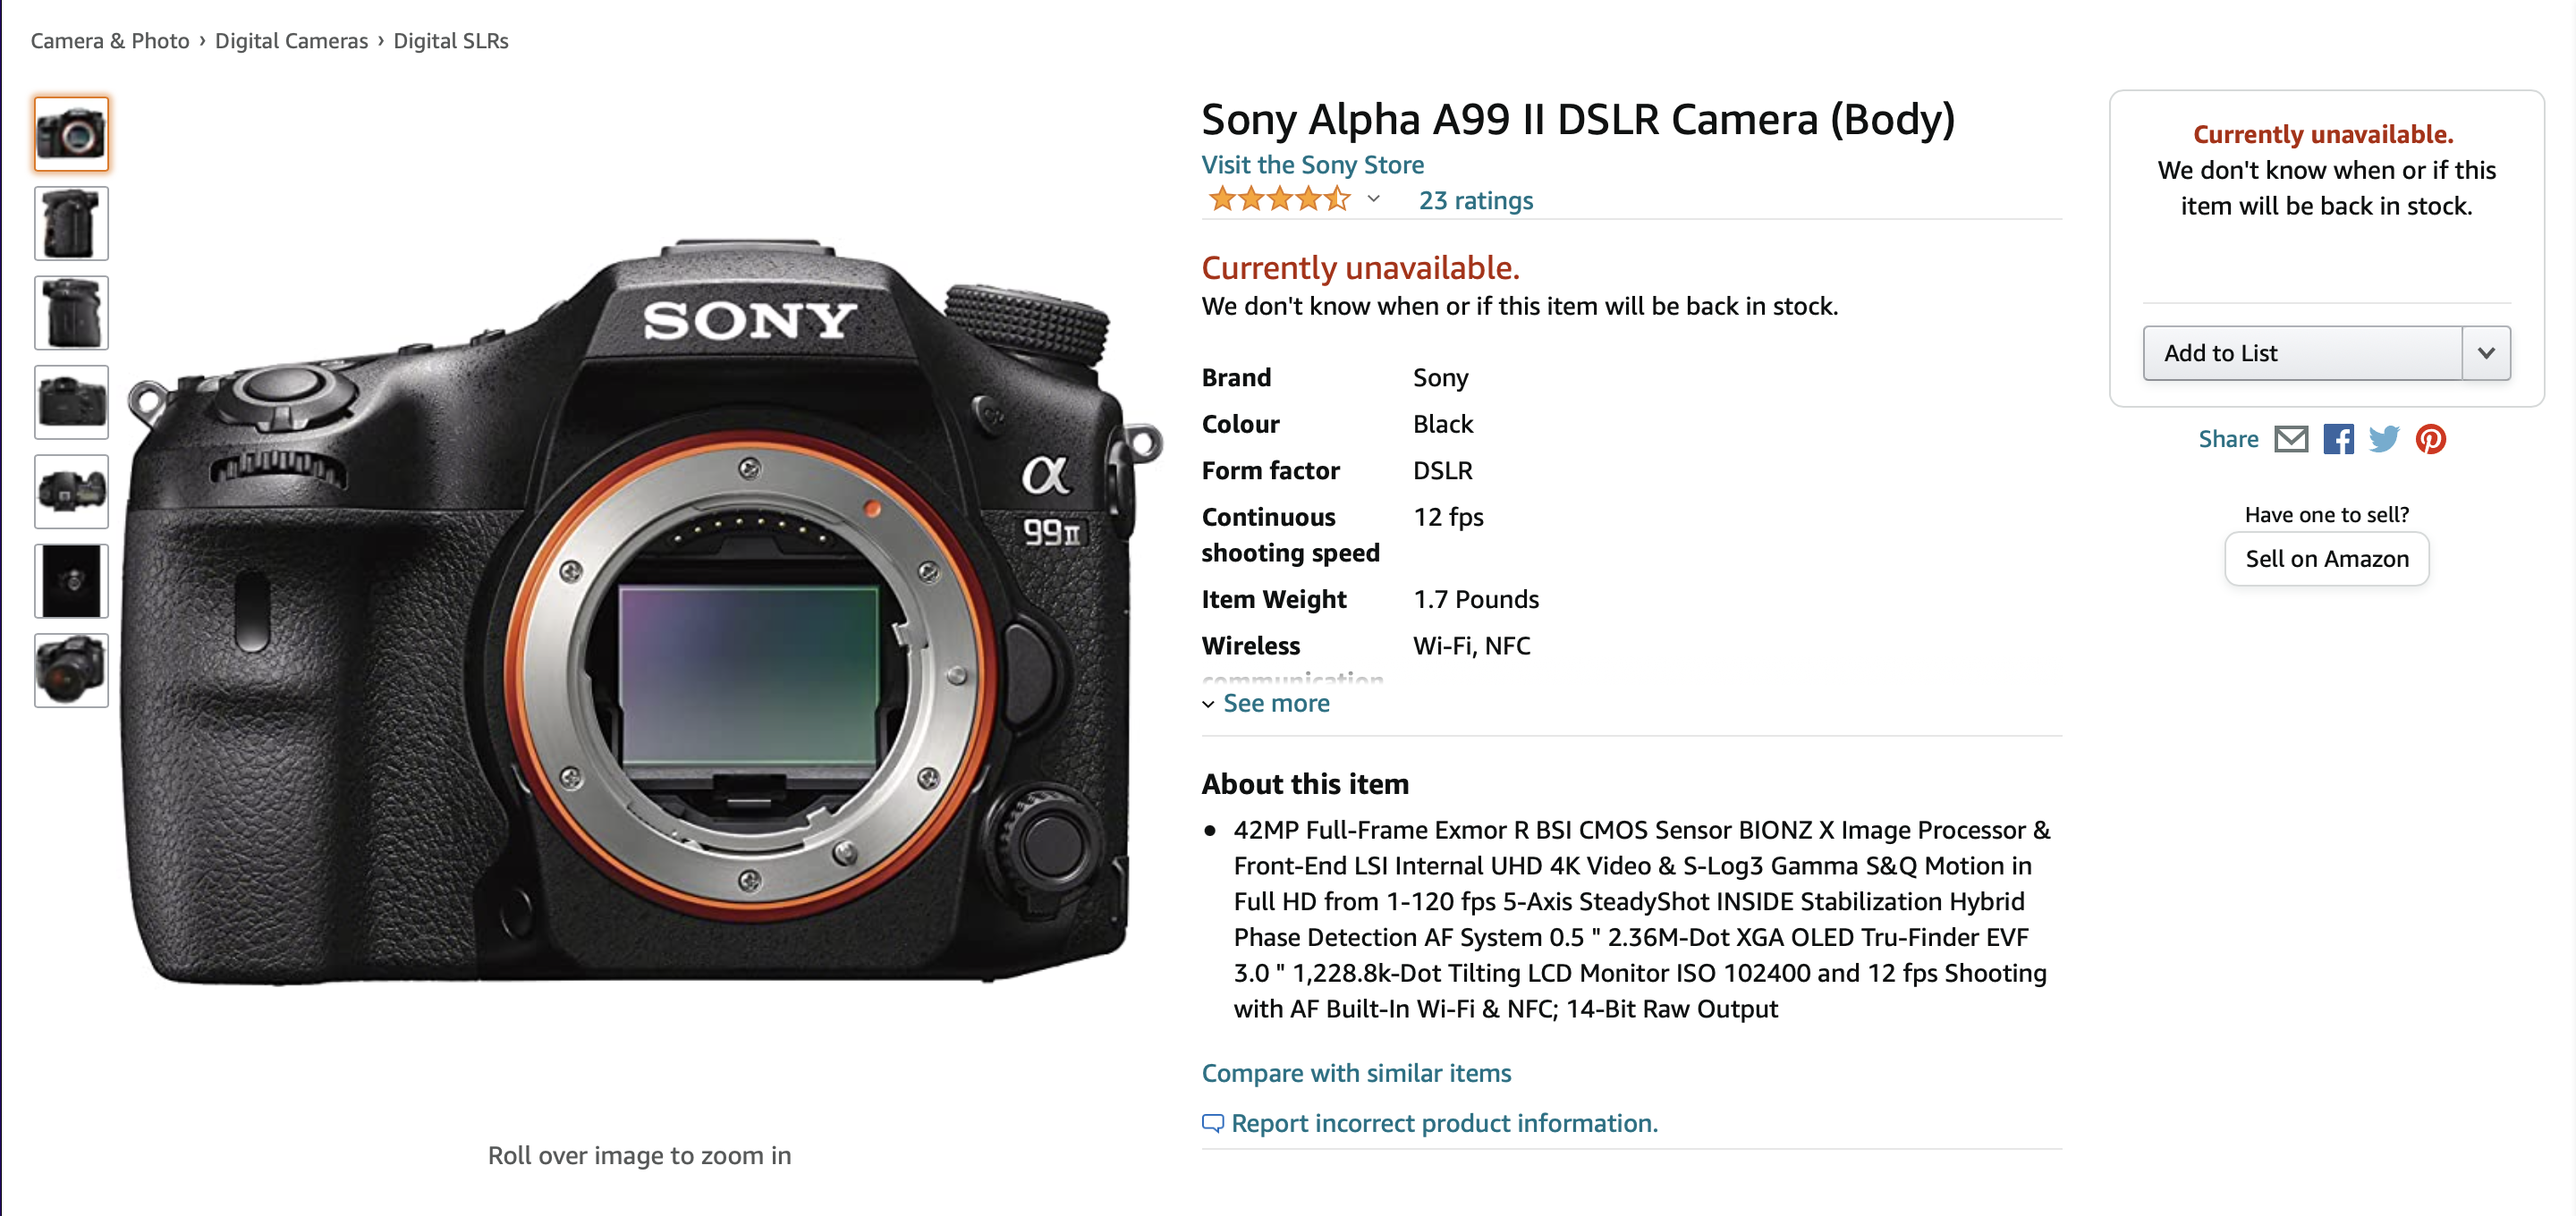 Screenshot of listings for Sony's A99 II DSLR camera being unavailable for purchase